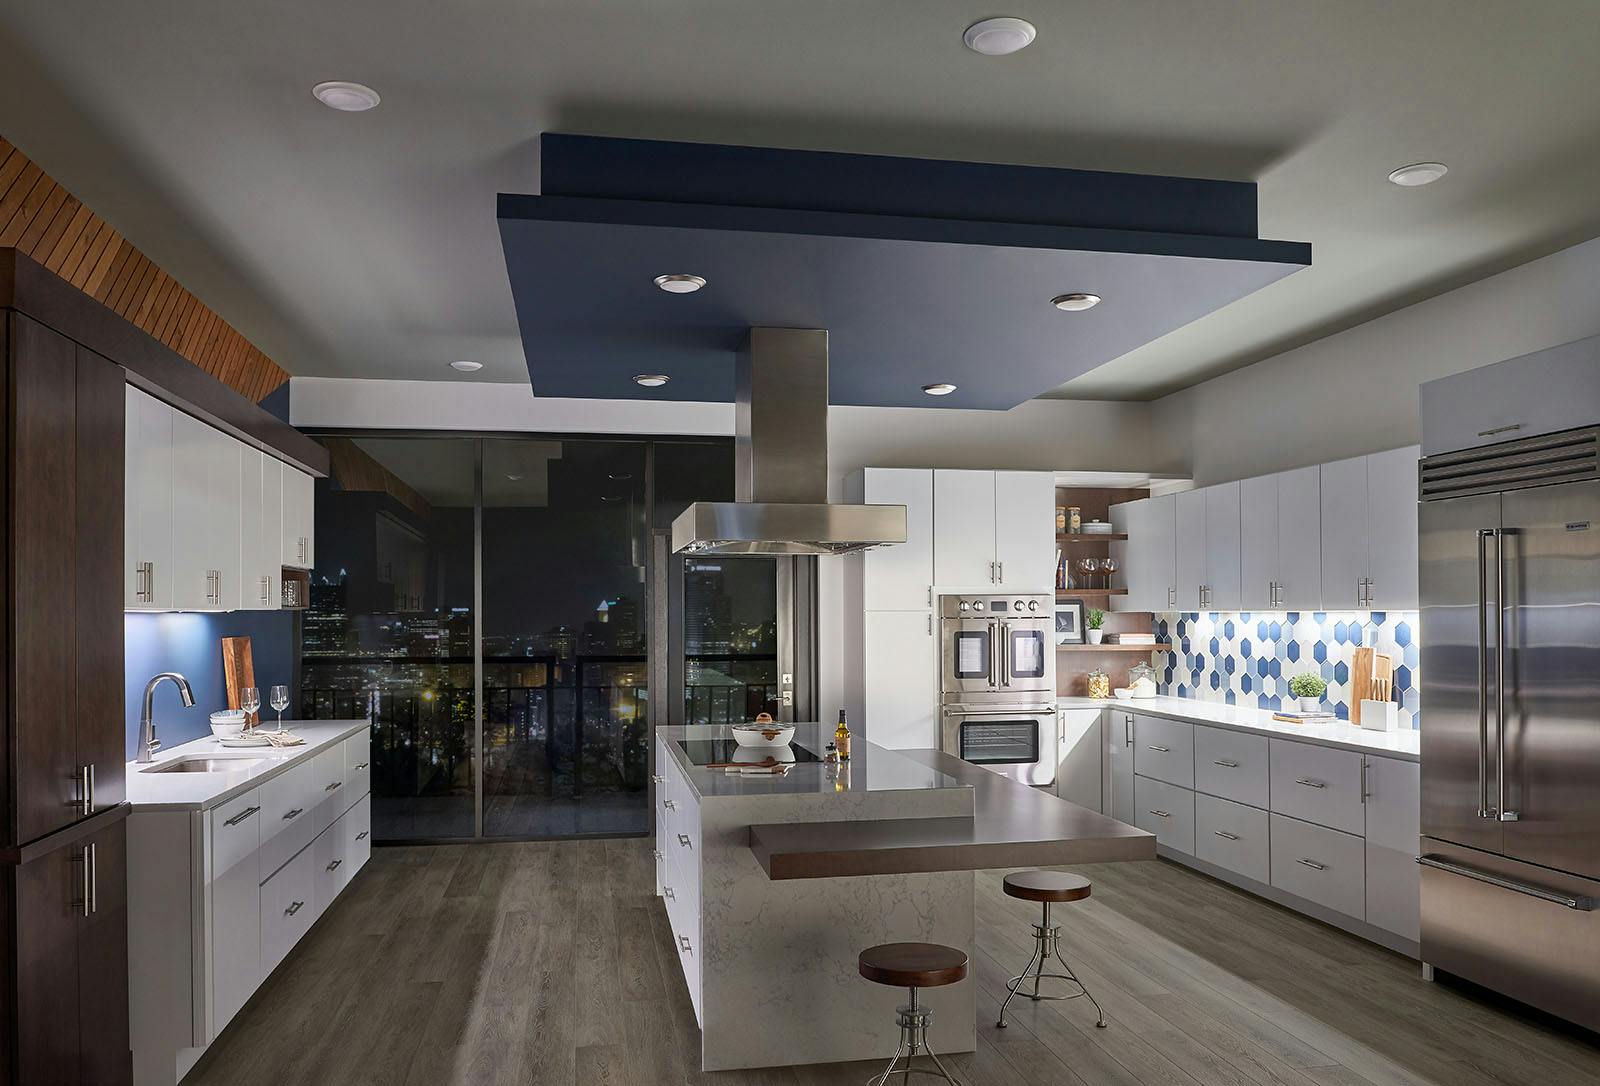 Modern white kitchen with blue, wood, and stainless steel accents in an urban setting with only under cabinet lighting turned